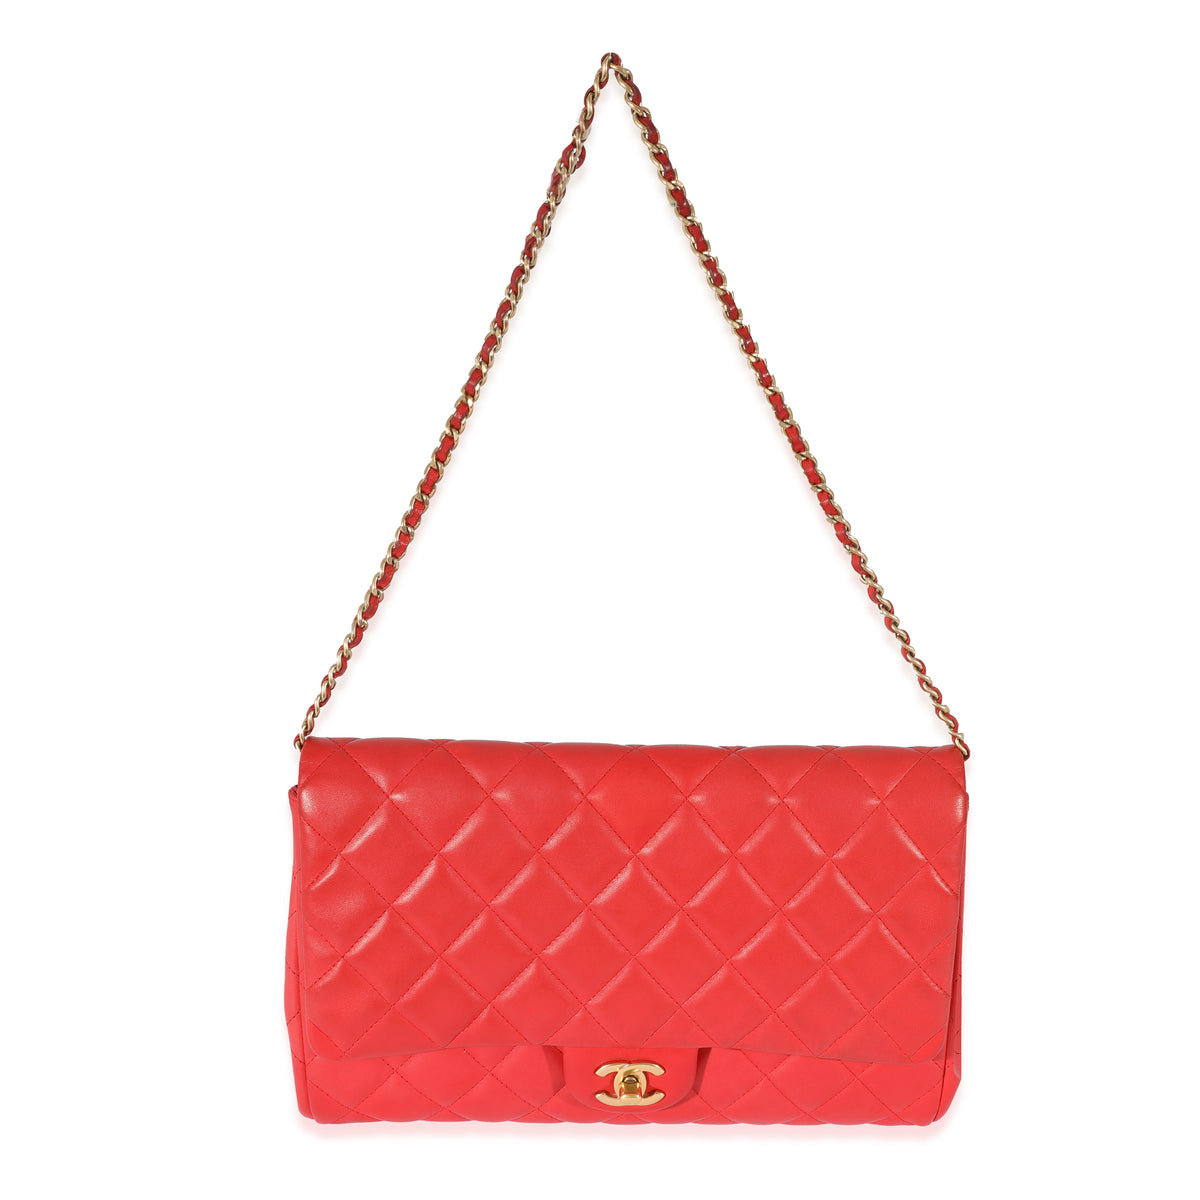 Chanel Red Matelasse Leather Clutch on Chain Chanel